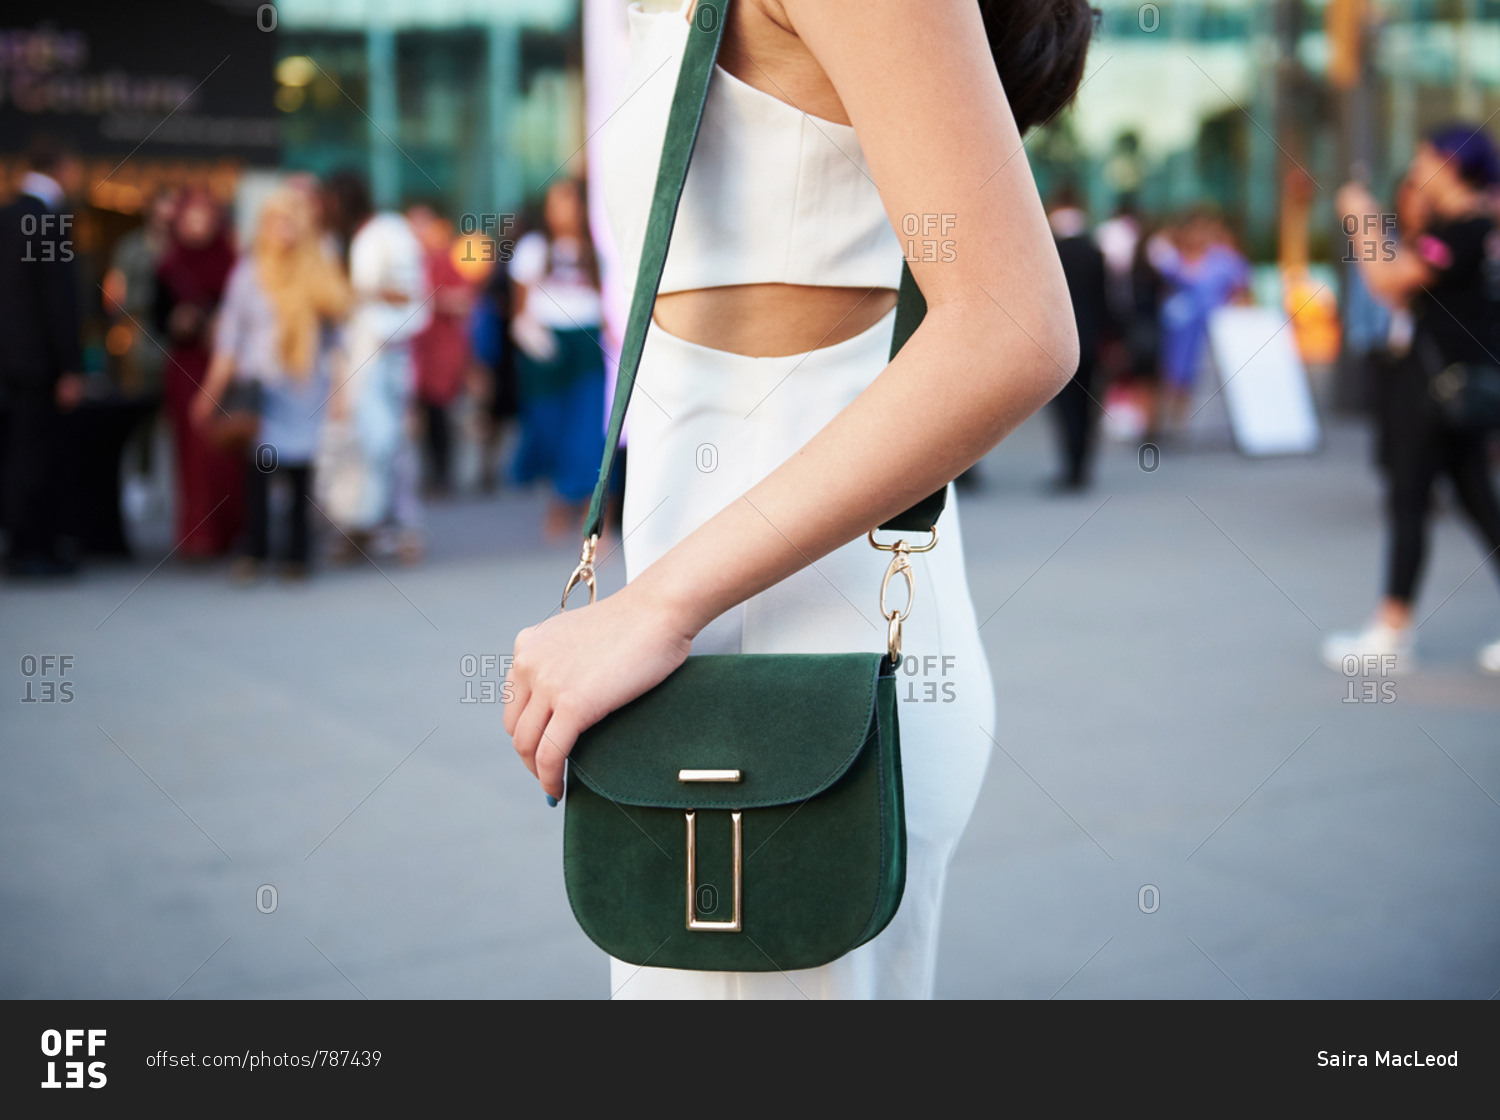 March 09, 2018- Melbourne, Australia: Fashion event guest wearing chic  summer outfit with dark green crossbody purse bag stock photo - OFFSET